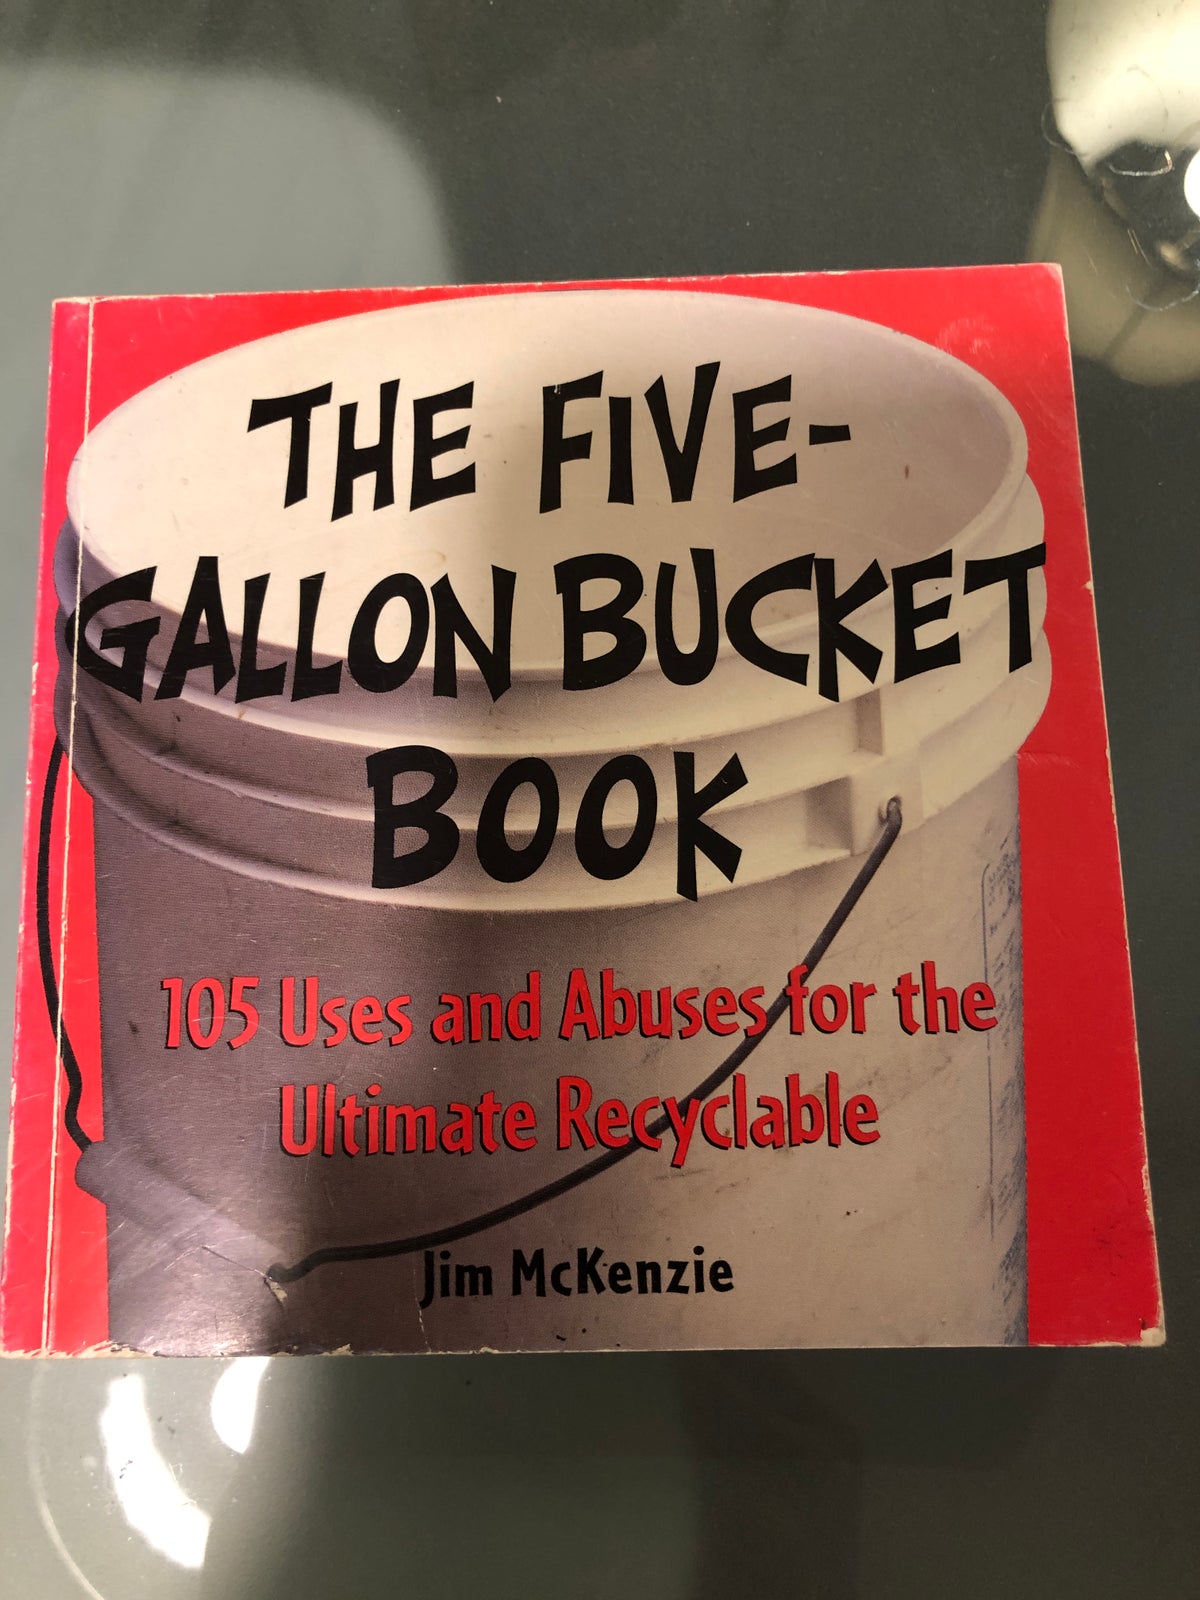 The Five-Gallon Bucket Book by Jim McKenzie, Paperback